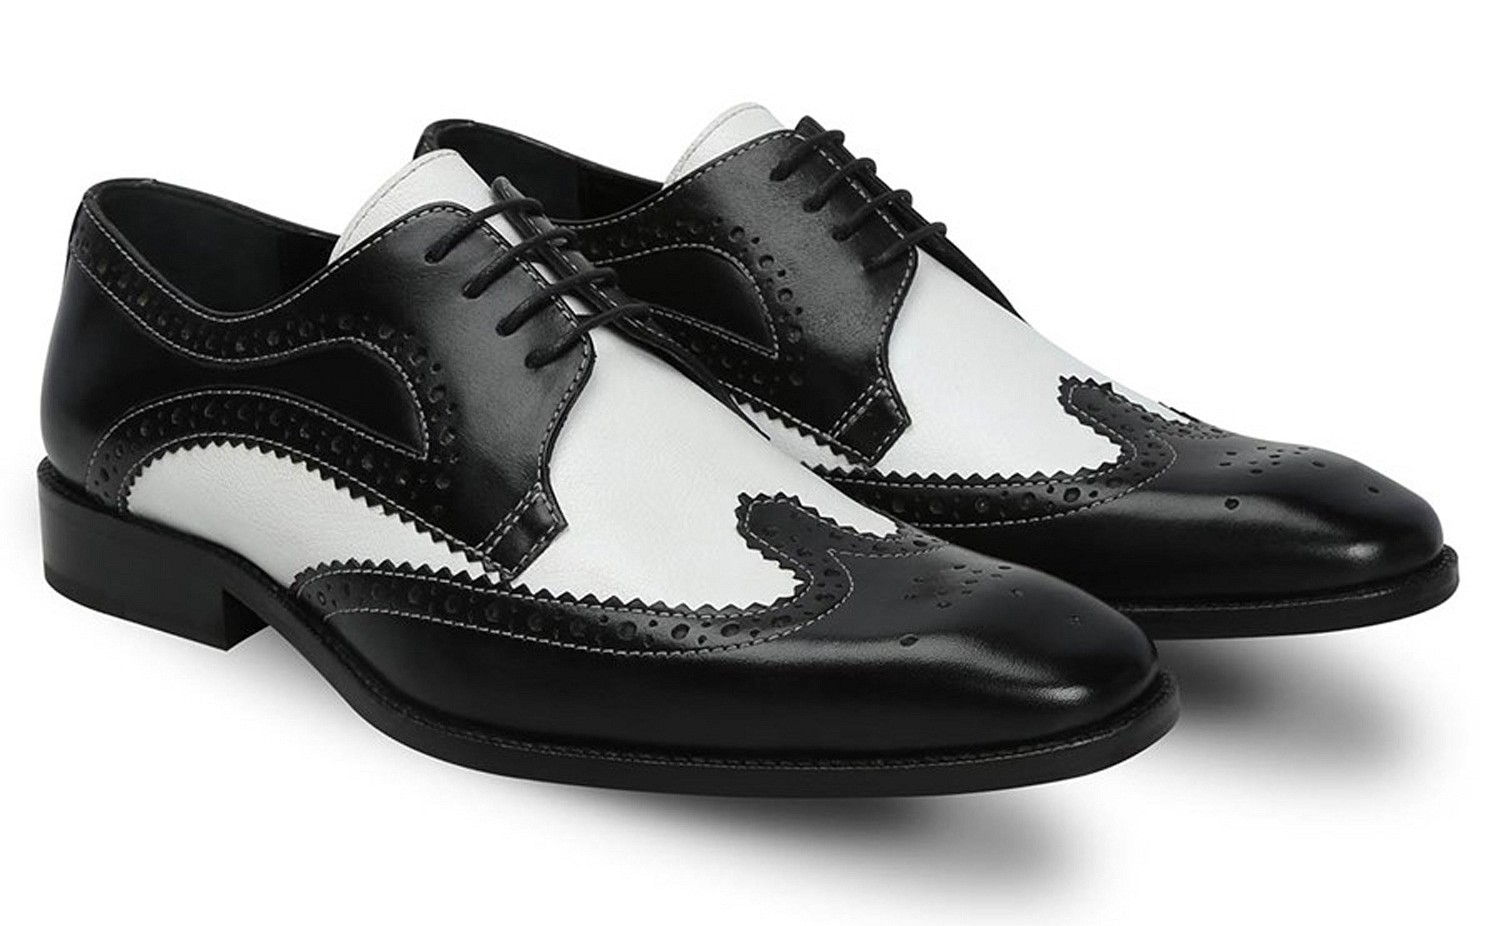 black-and-white-leather-full-brogue-wingtip-formal-shoes-by-brune-rs-7999